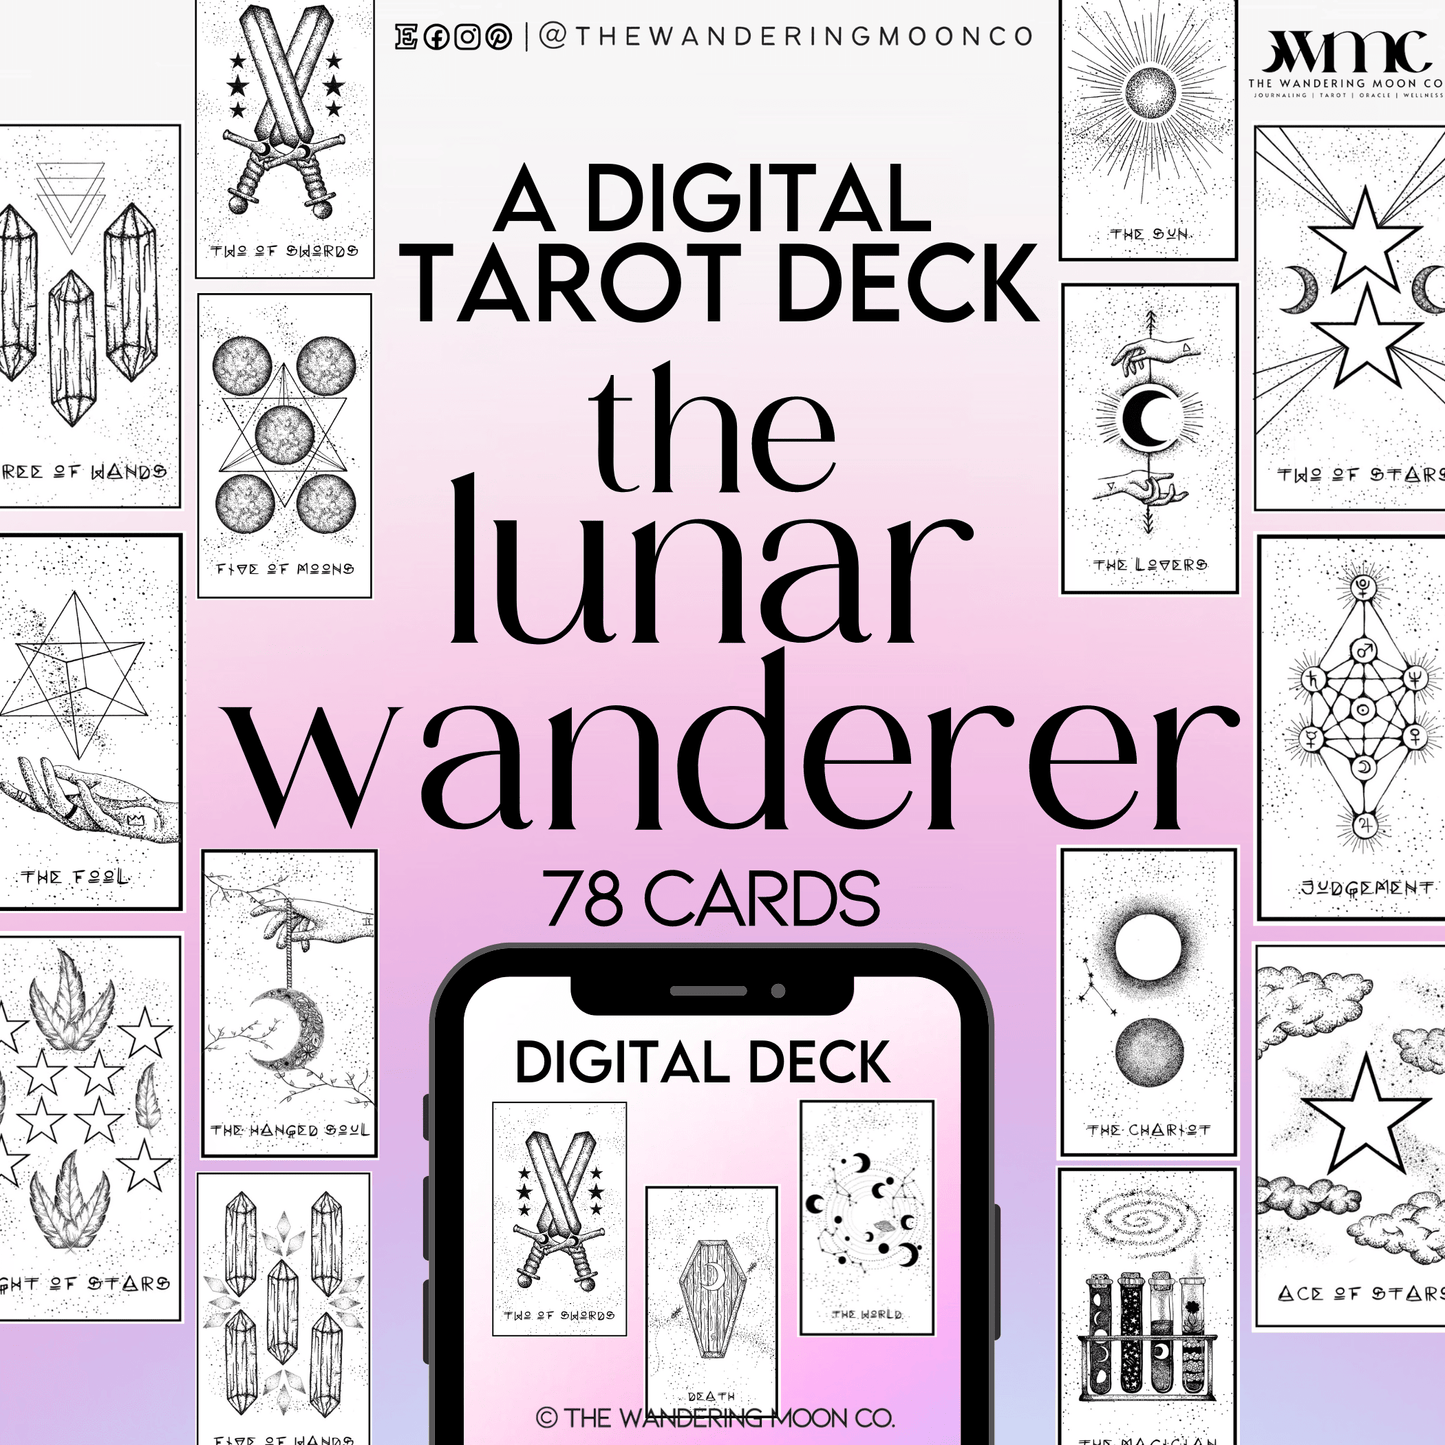 tarot card cheat sheet: tarot & the 12 houses of astrology instant download - The Wandering Moon Co.